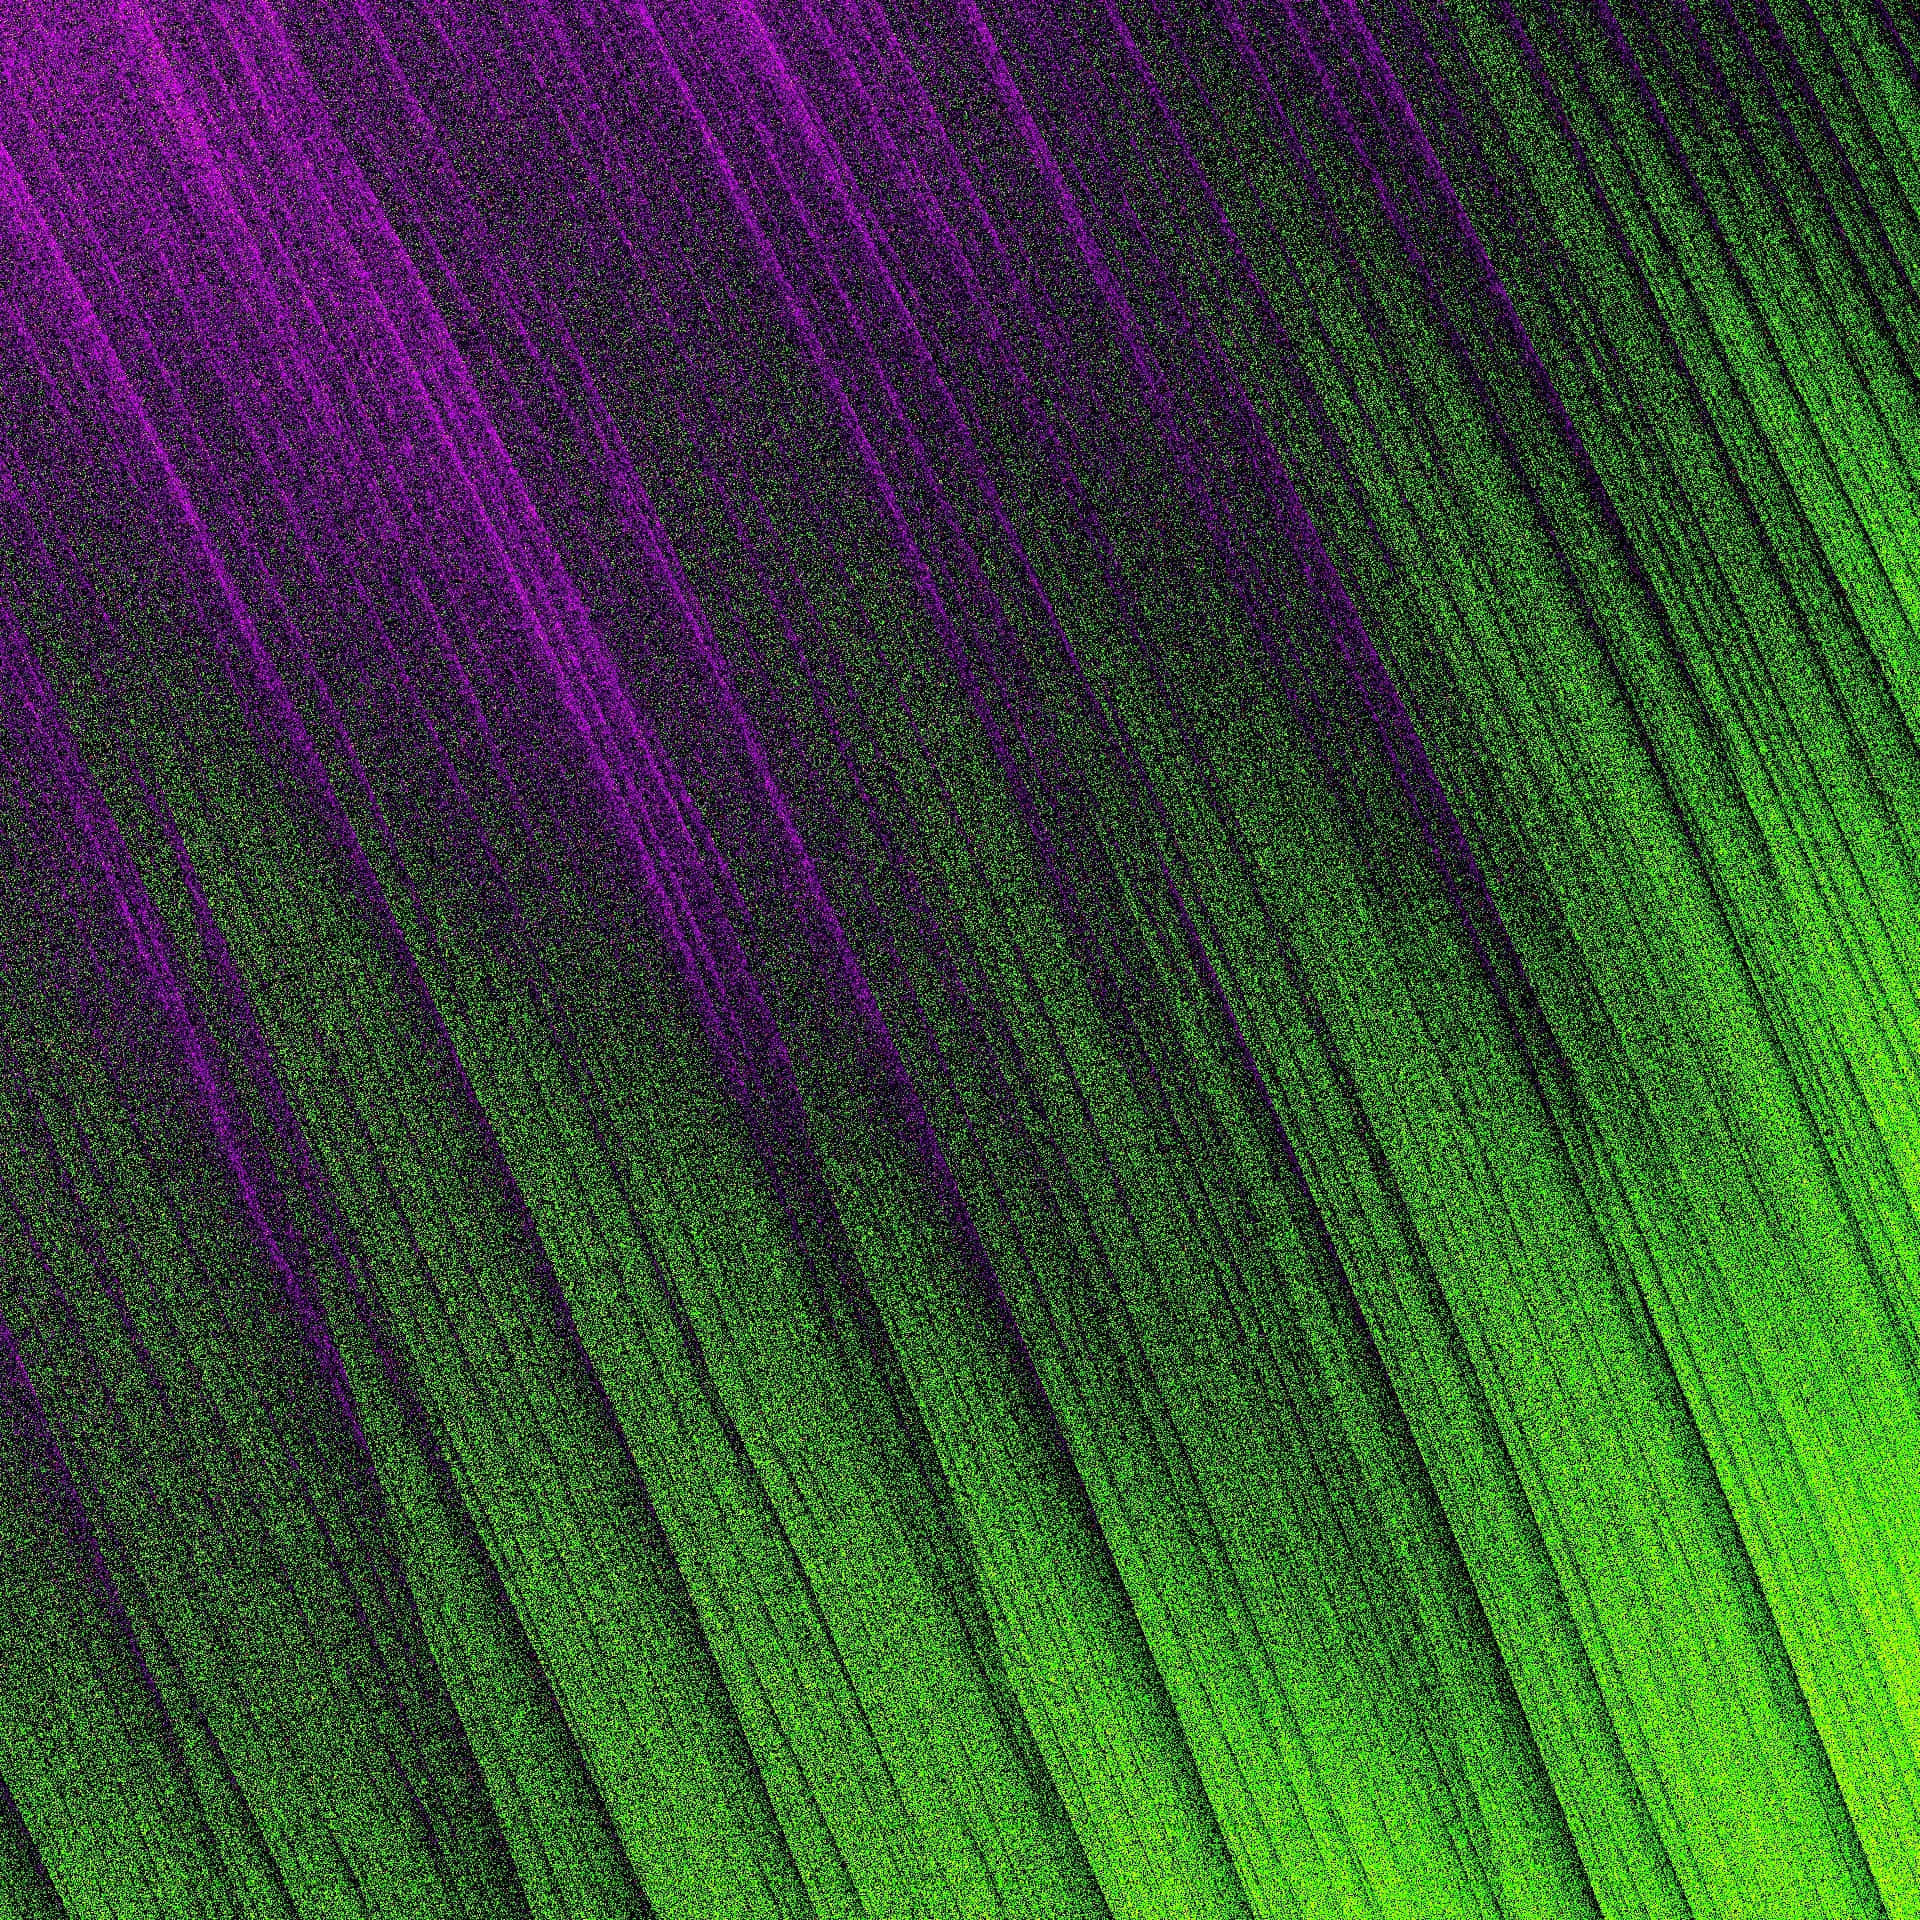 A graphic image of a vibrant purple and green background